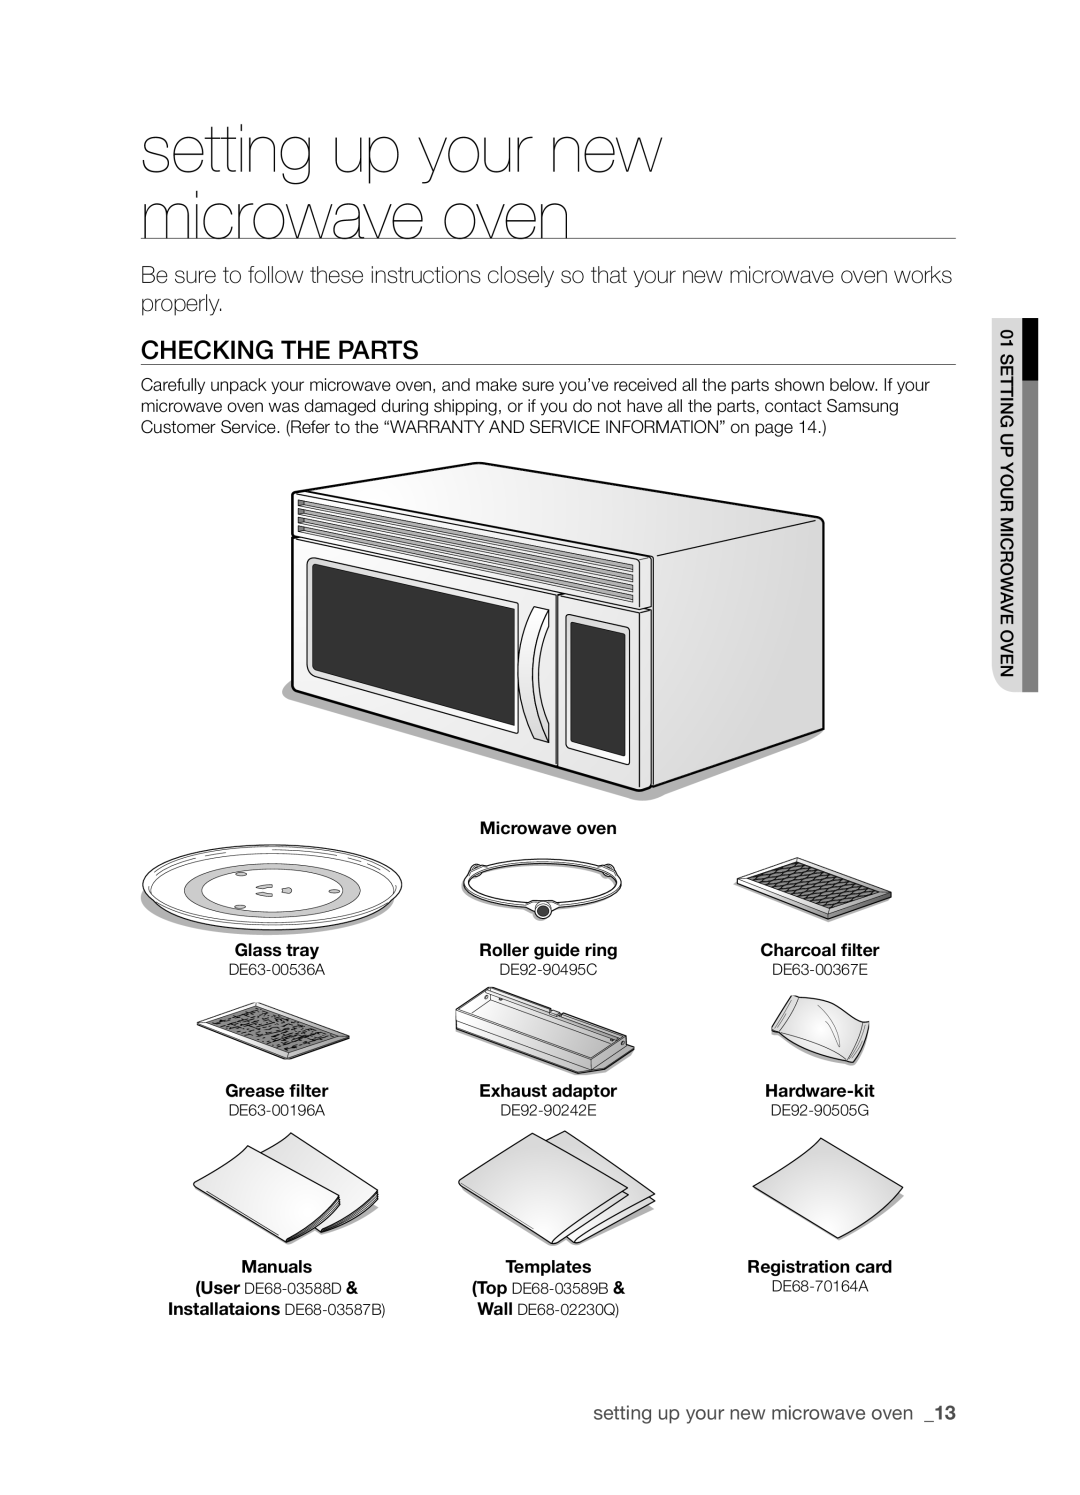 Samsung SMH9151B setting up your new microwave oven, Checking the parts, Microwave oven, Glass tray, Grease filter 